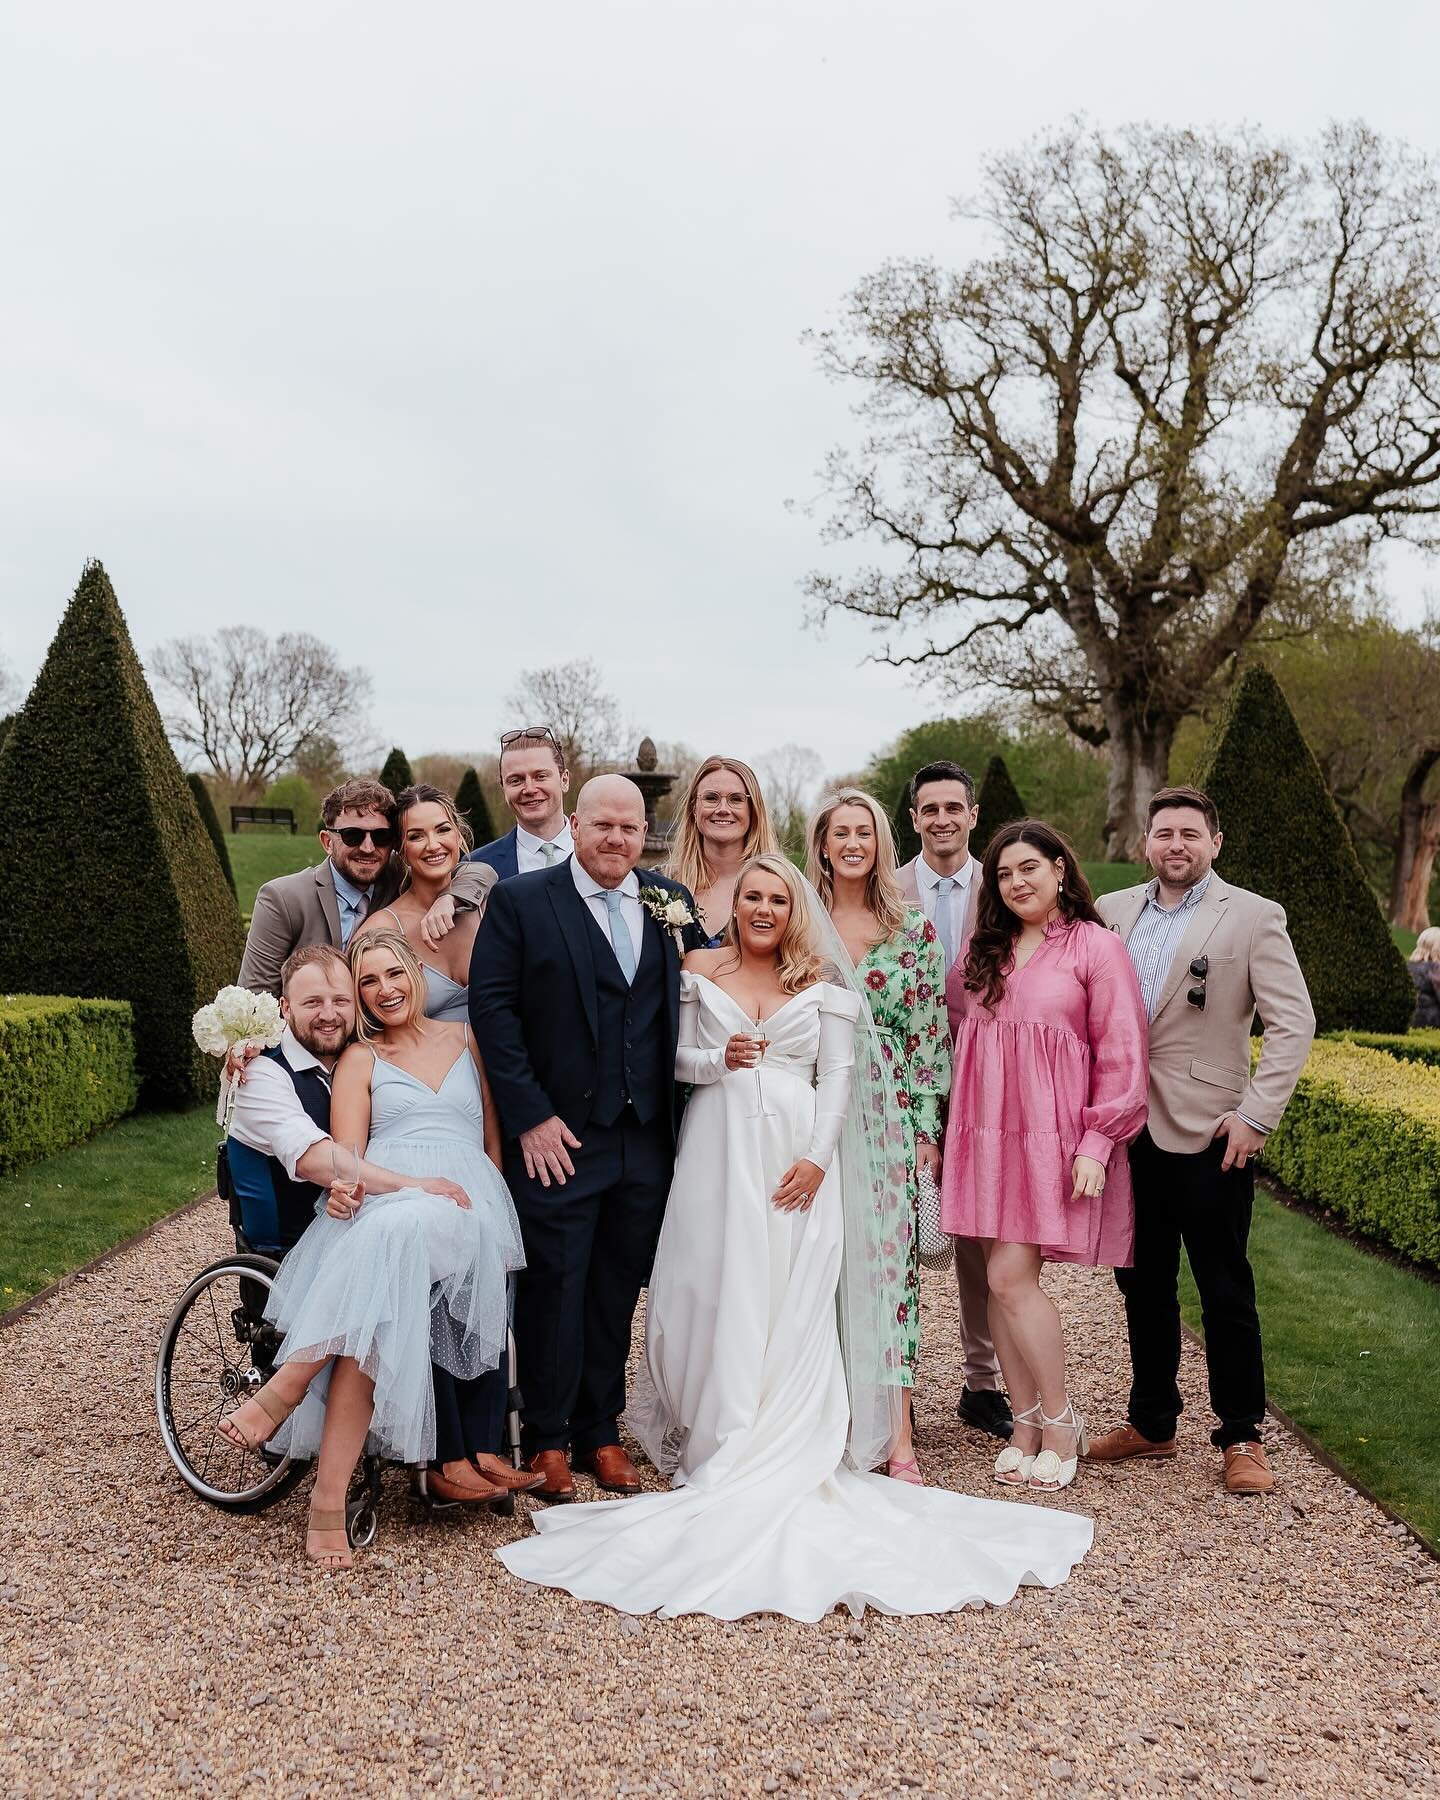 Happy moments from Charlotte and Dids&rsquo; wedding in April ✨

These photos give me that bank holiday vibe! Enjoy the sunshine today everyone ☀️ 

Photographer: @weddings.by.emma.olivia
Venue: @oxneadhall
Florist: @oopsadaisyflorist
Dress: @camilla